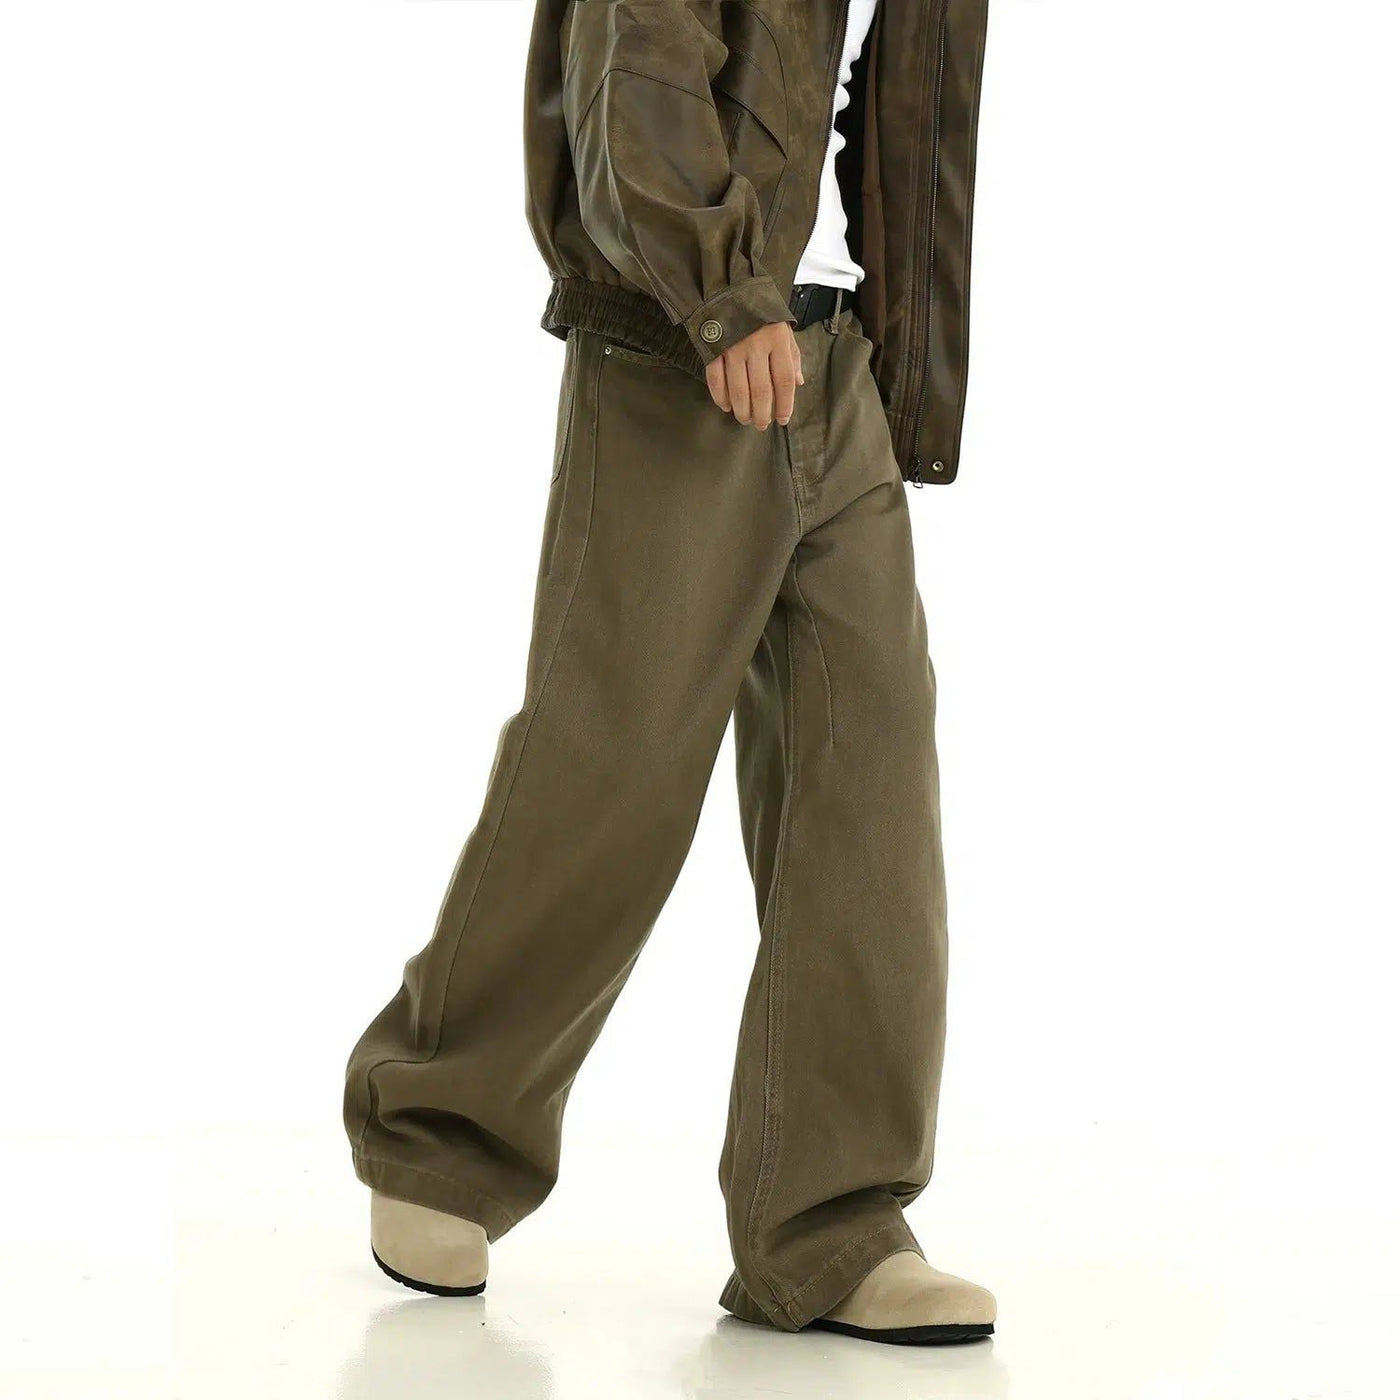 Faded Zip Fly Straight Leg Pants Korean Street Fashion Pants By MEBXX Shop Online at OH Vault